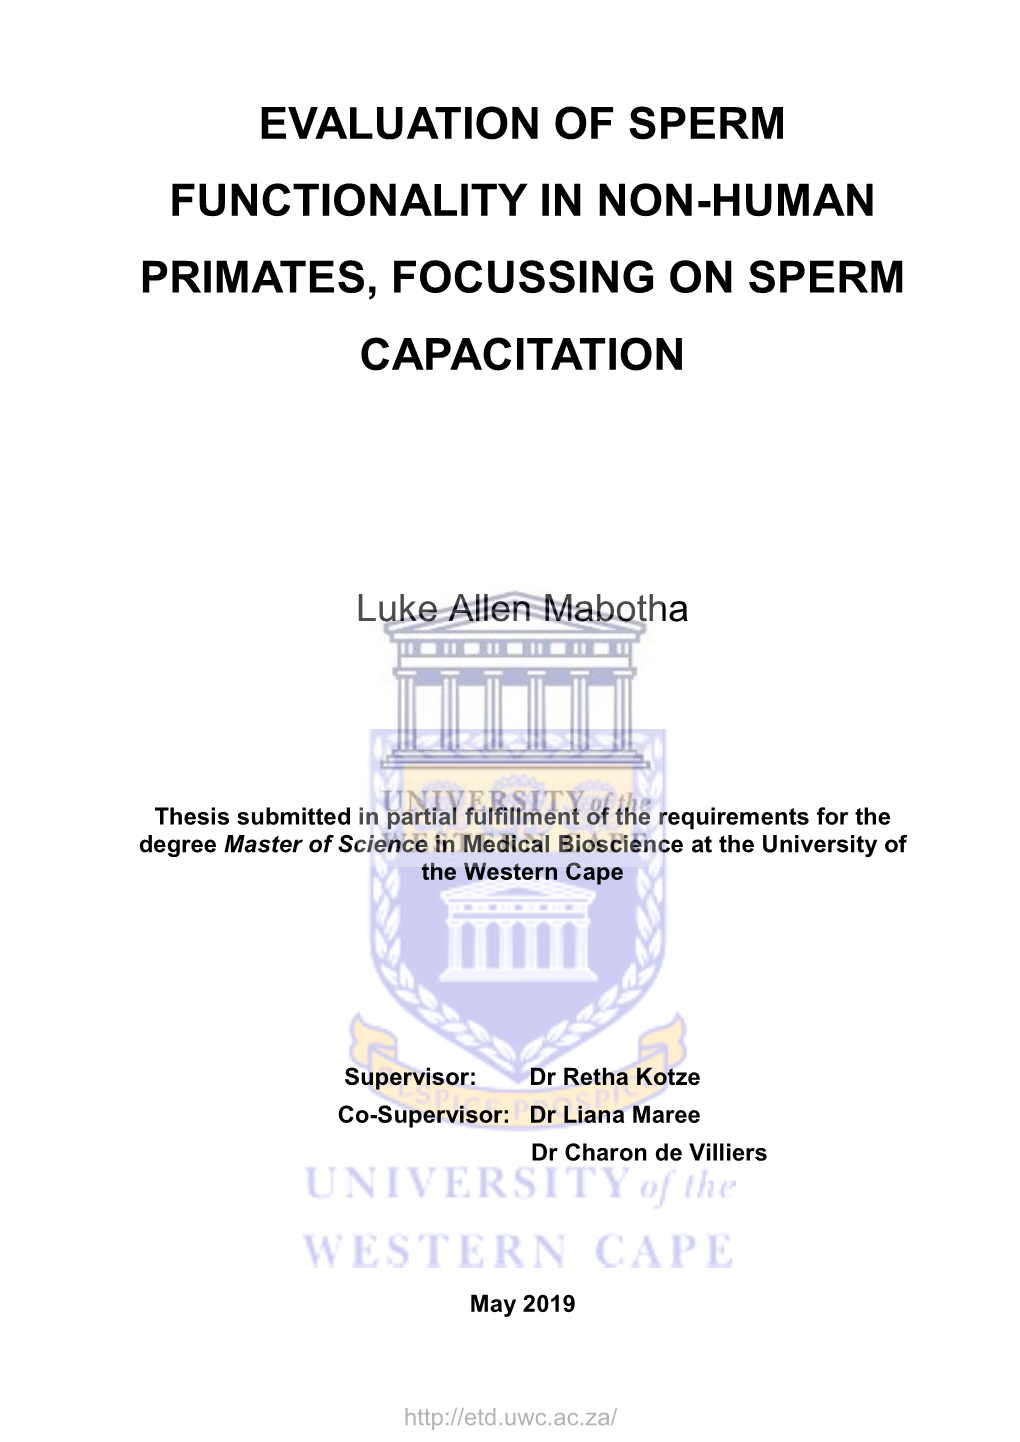 Evaluation of Sperm Functionality in Non-Human Primates, Focussing on Sperm Capacitation